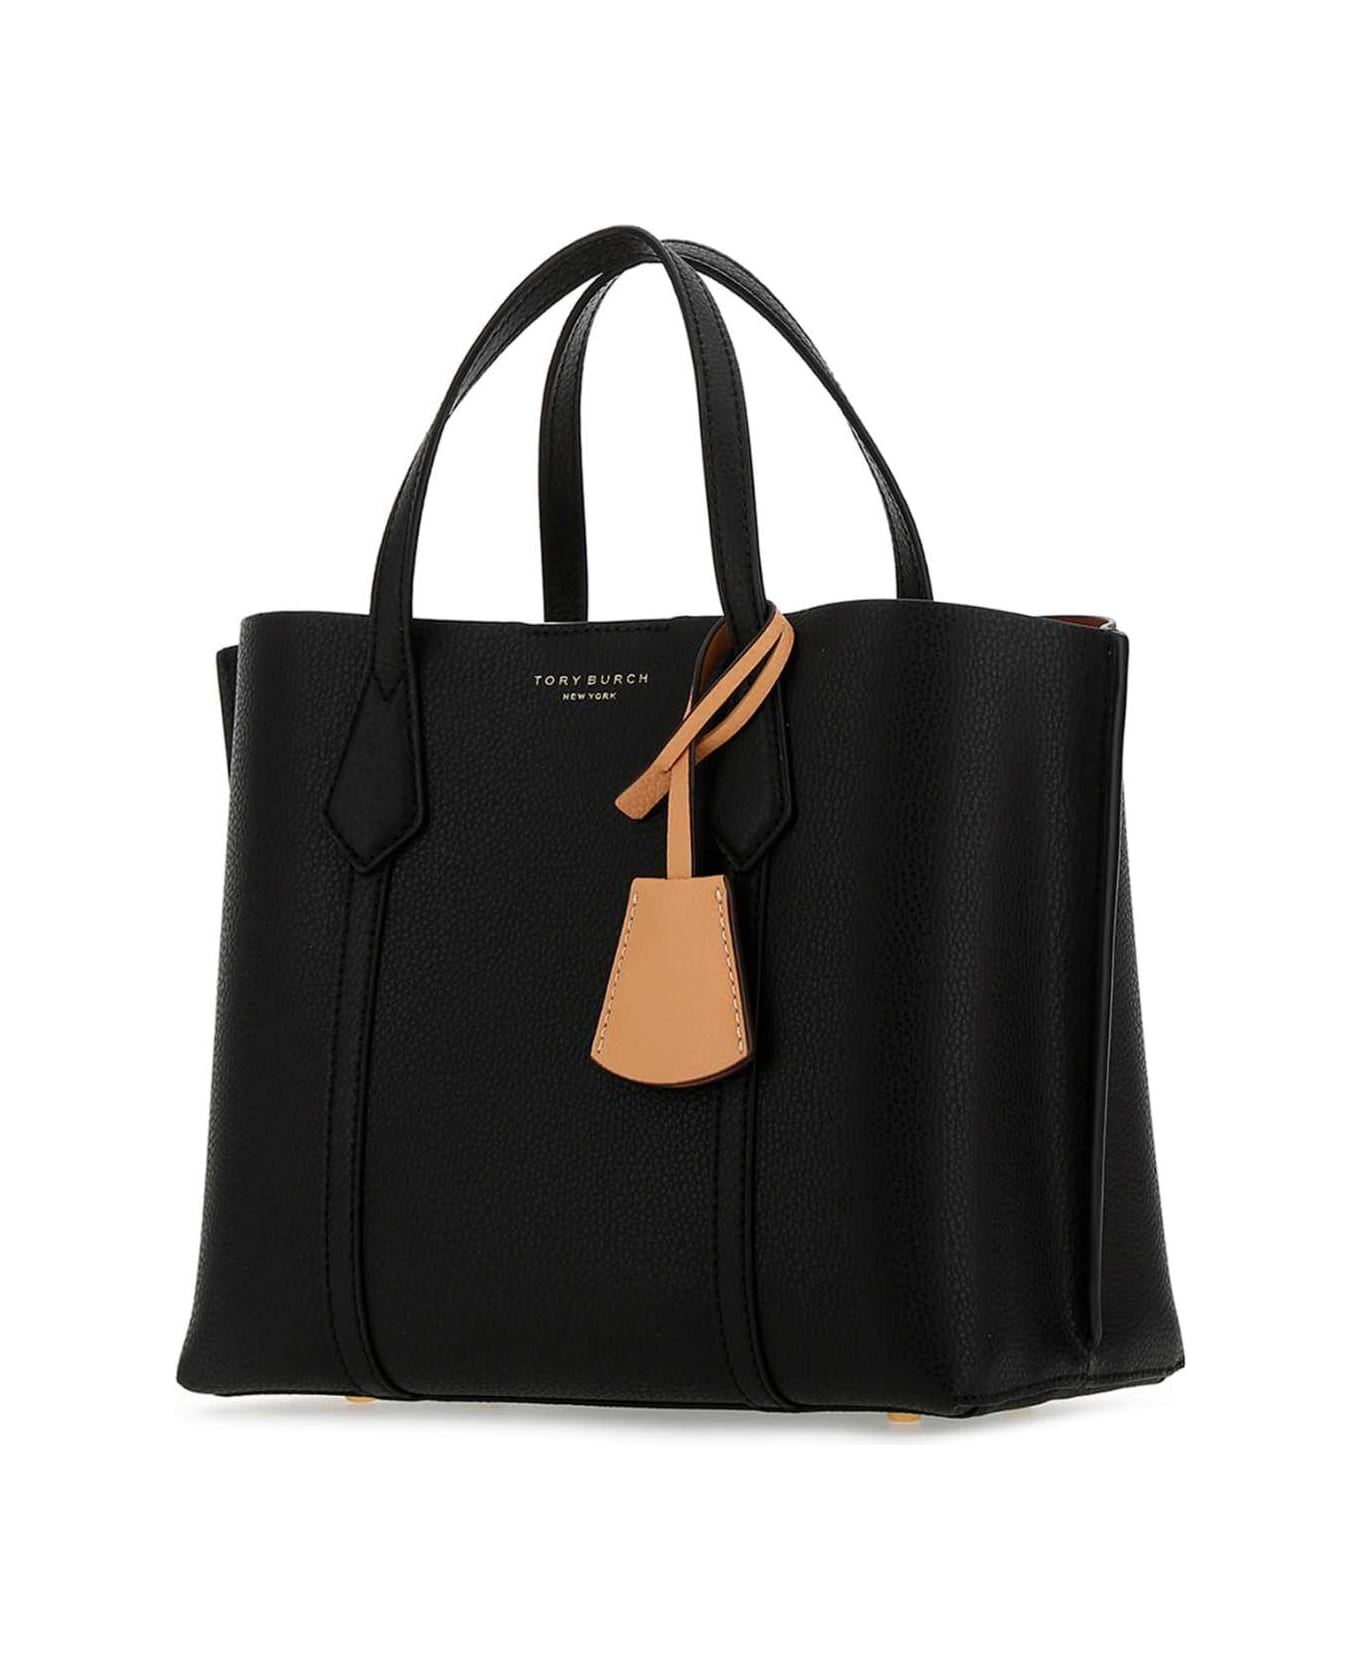 Tory Burch Black Leather Perry Shopping Bag - 001